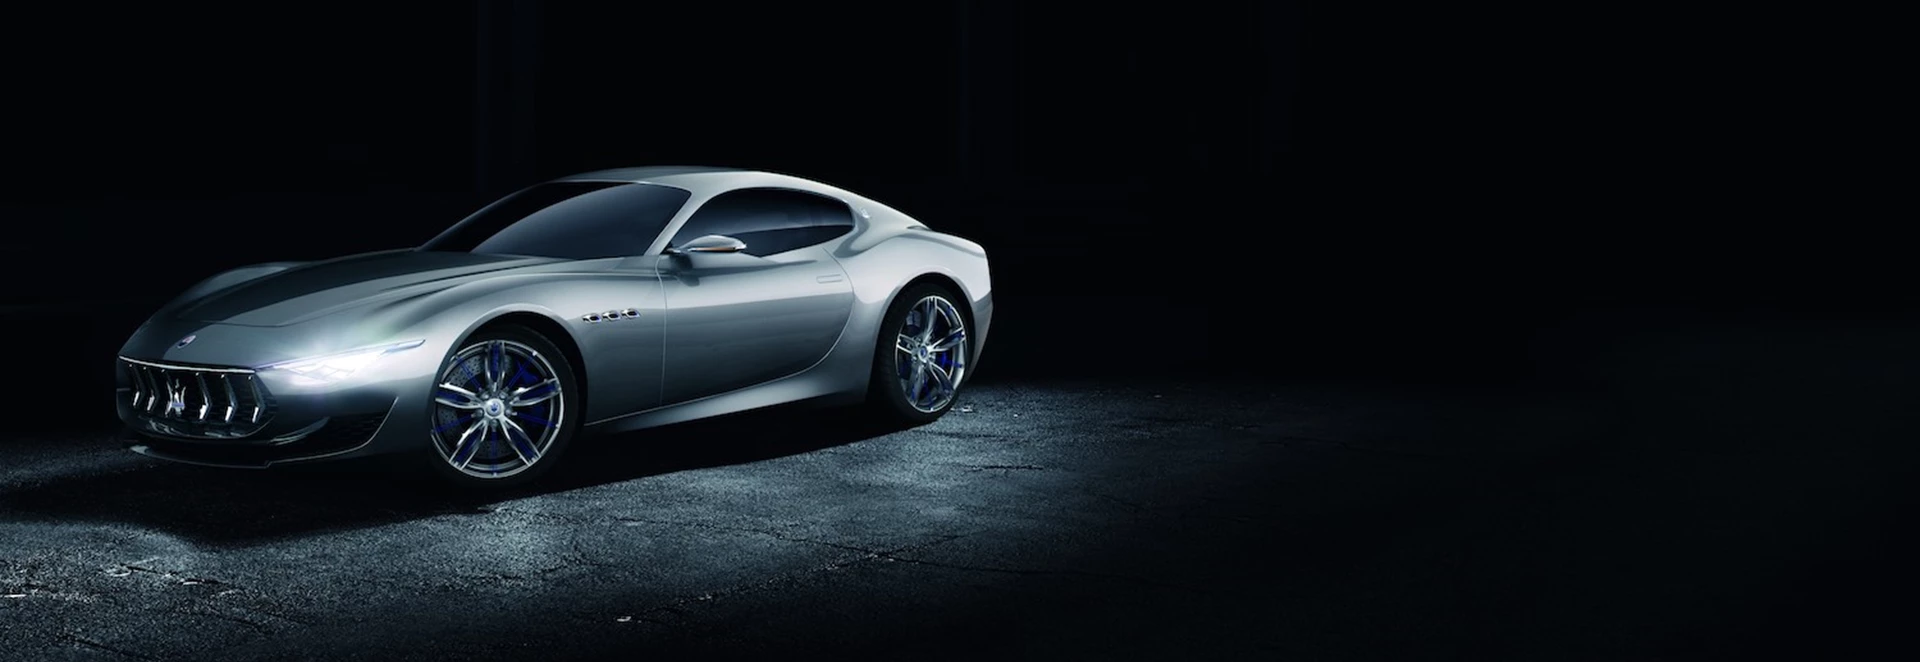 The Maserati Alfieri is coming! Here’s what to expect